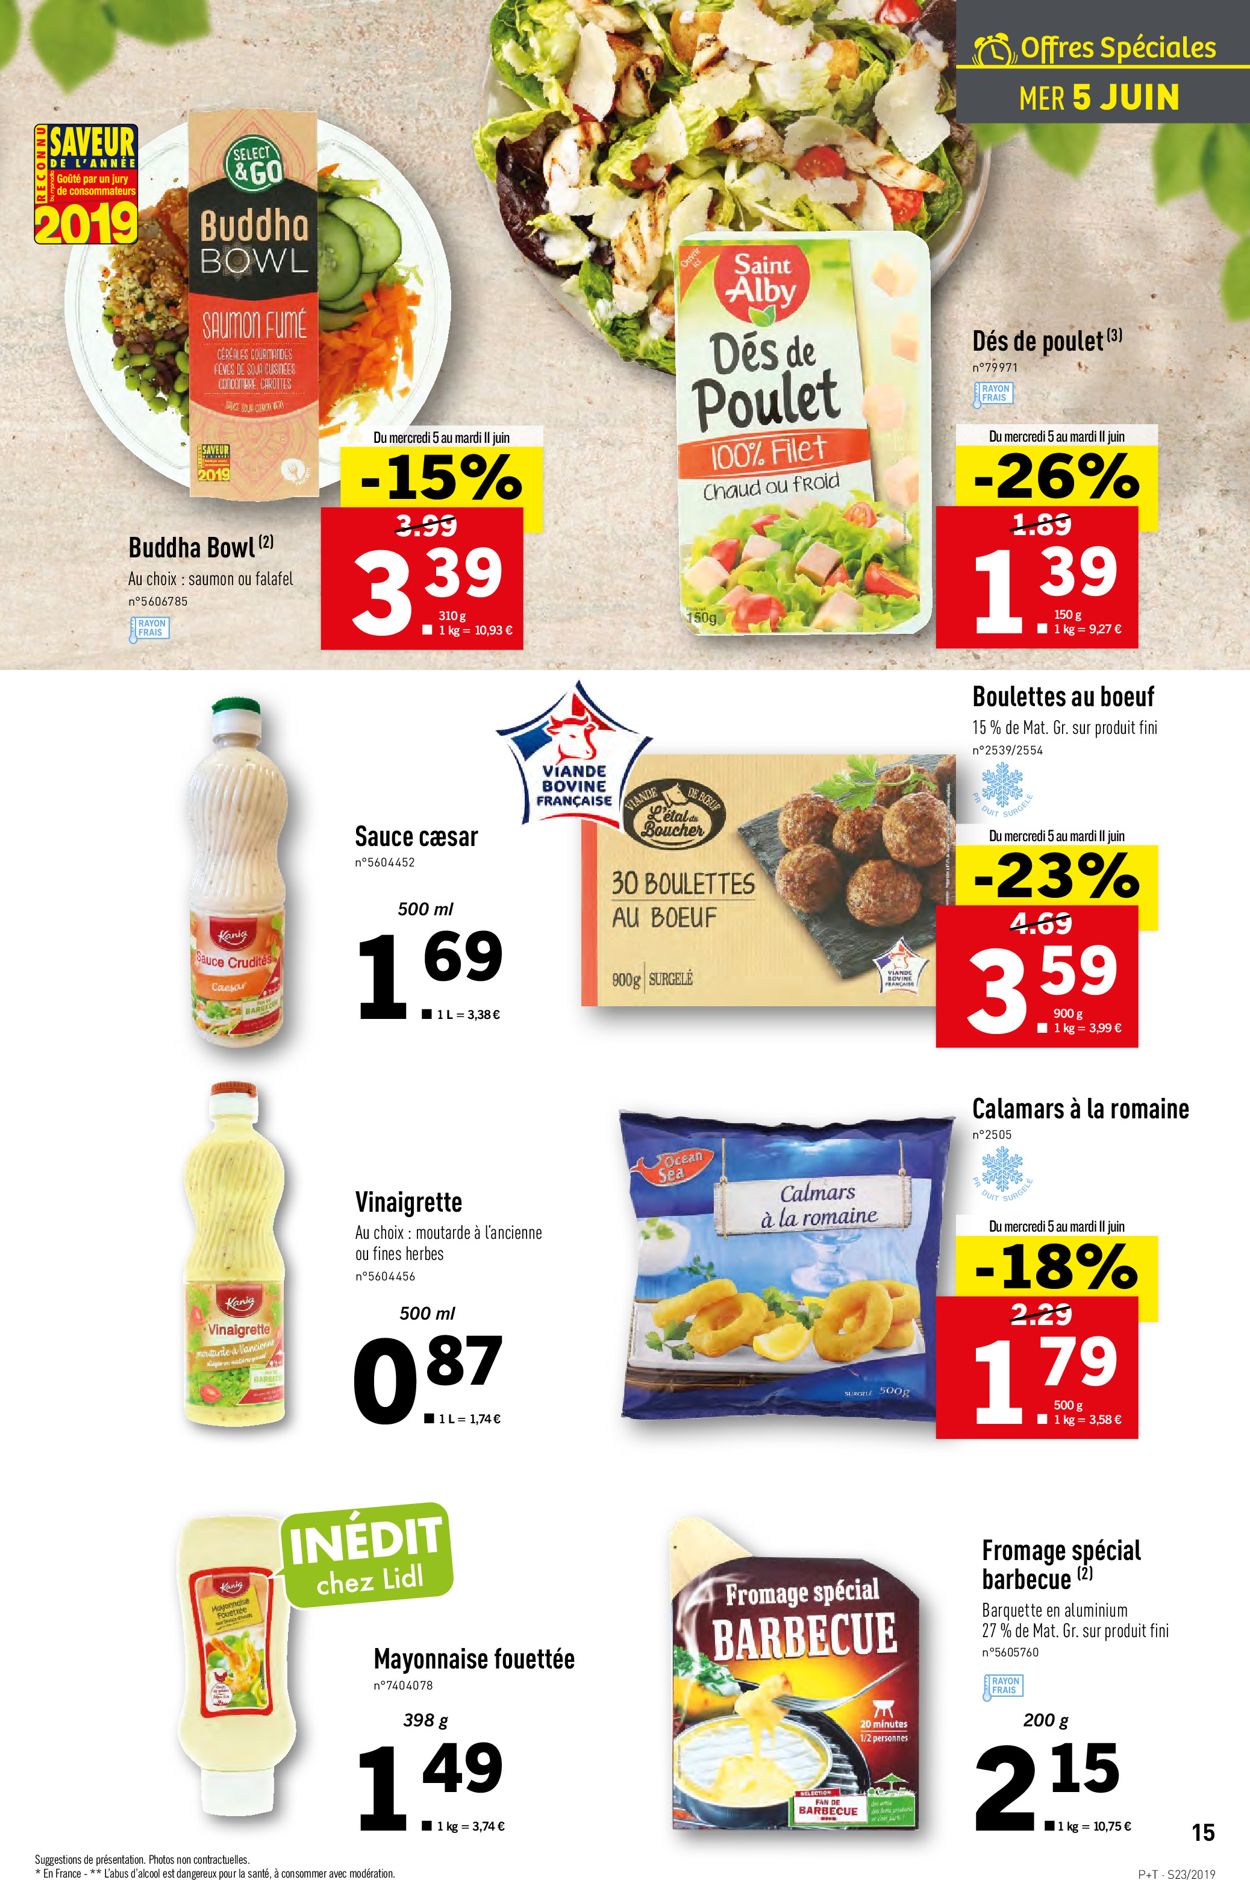 Lidl Catalogue - 05.06-11.06.2019 (Page 15)